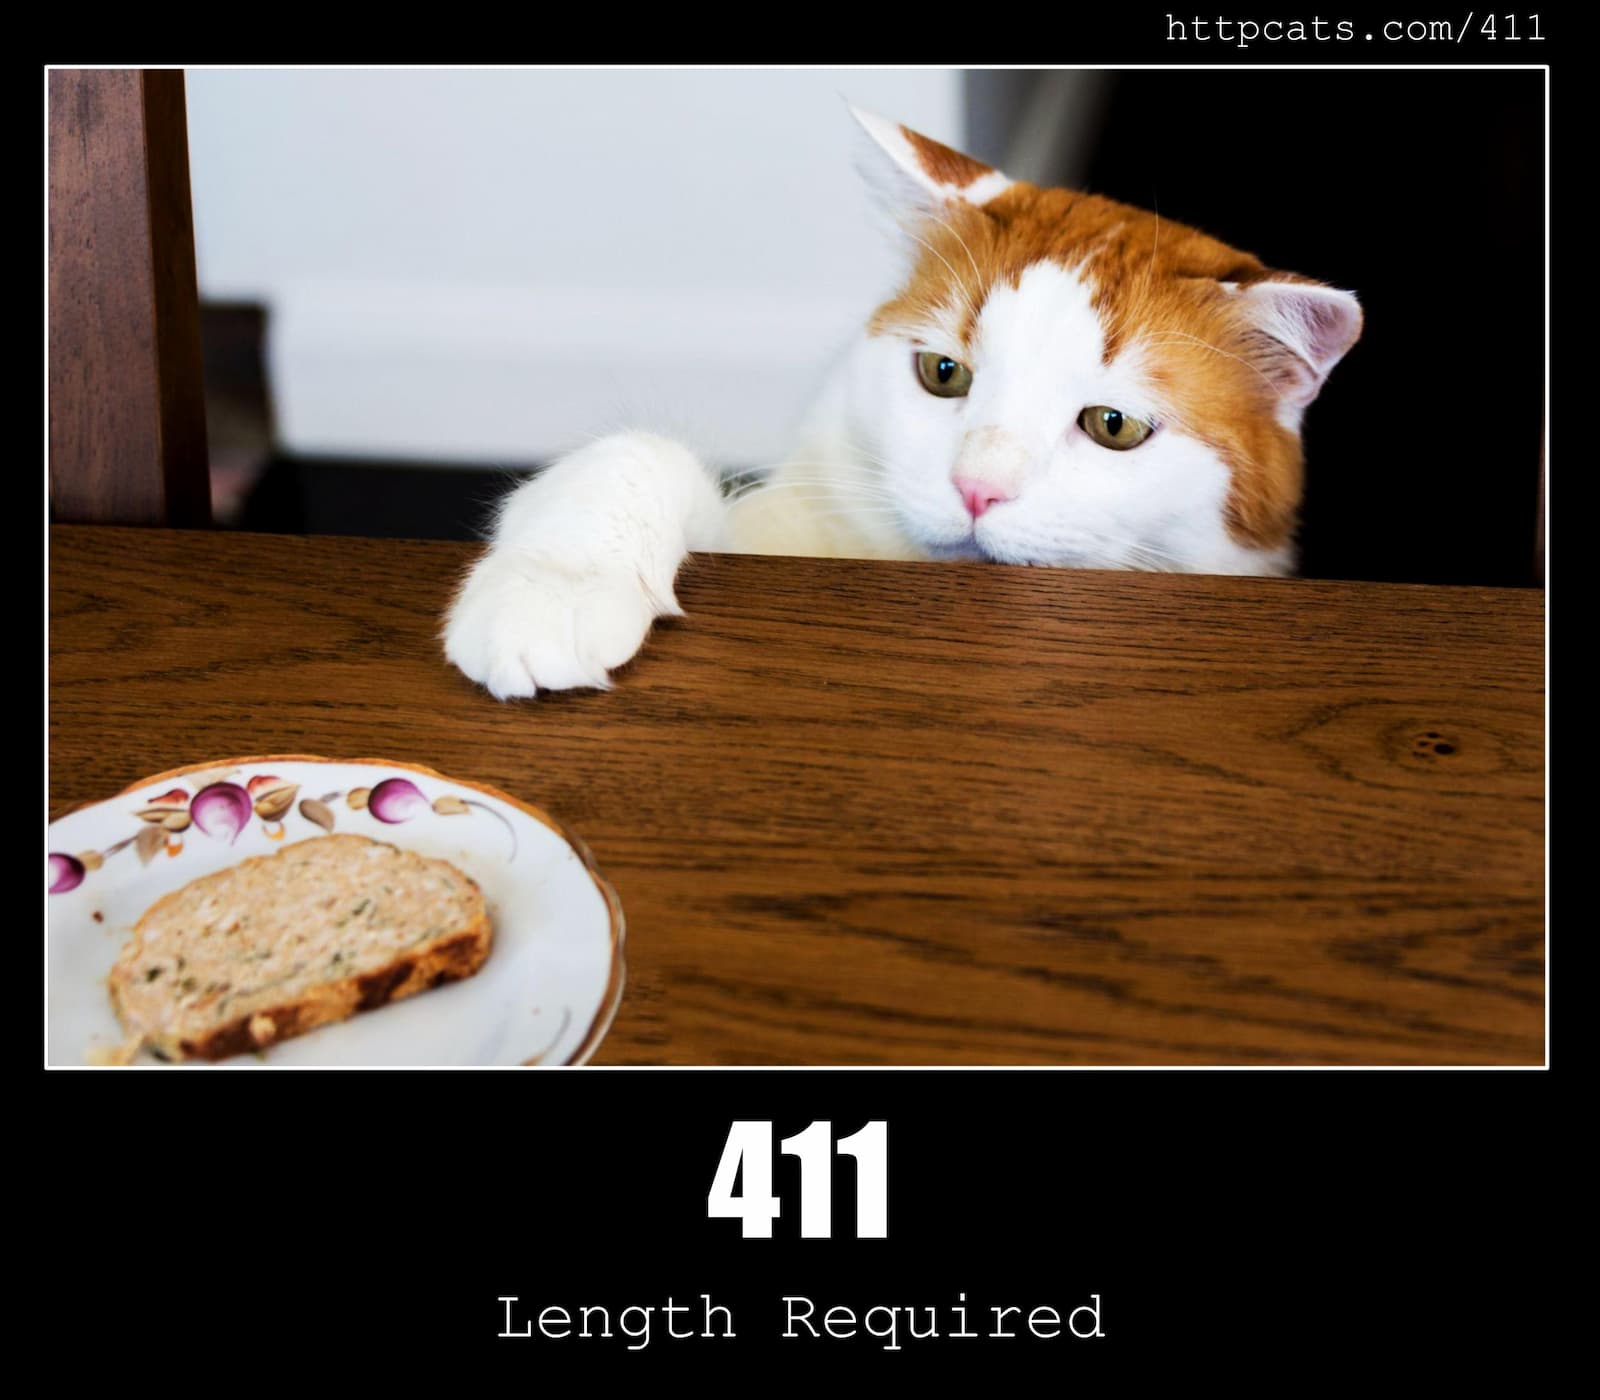 HTTP Status Code 411 Length Required & Cats